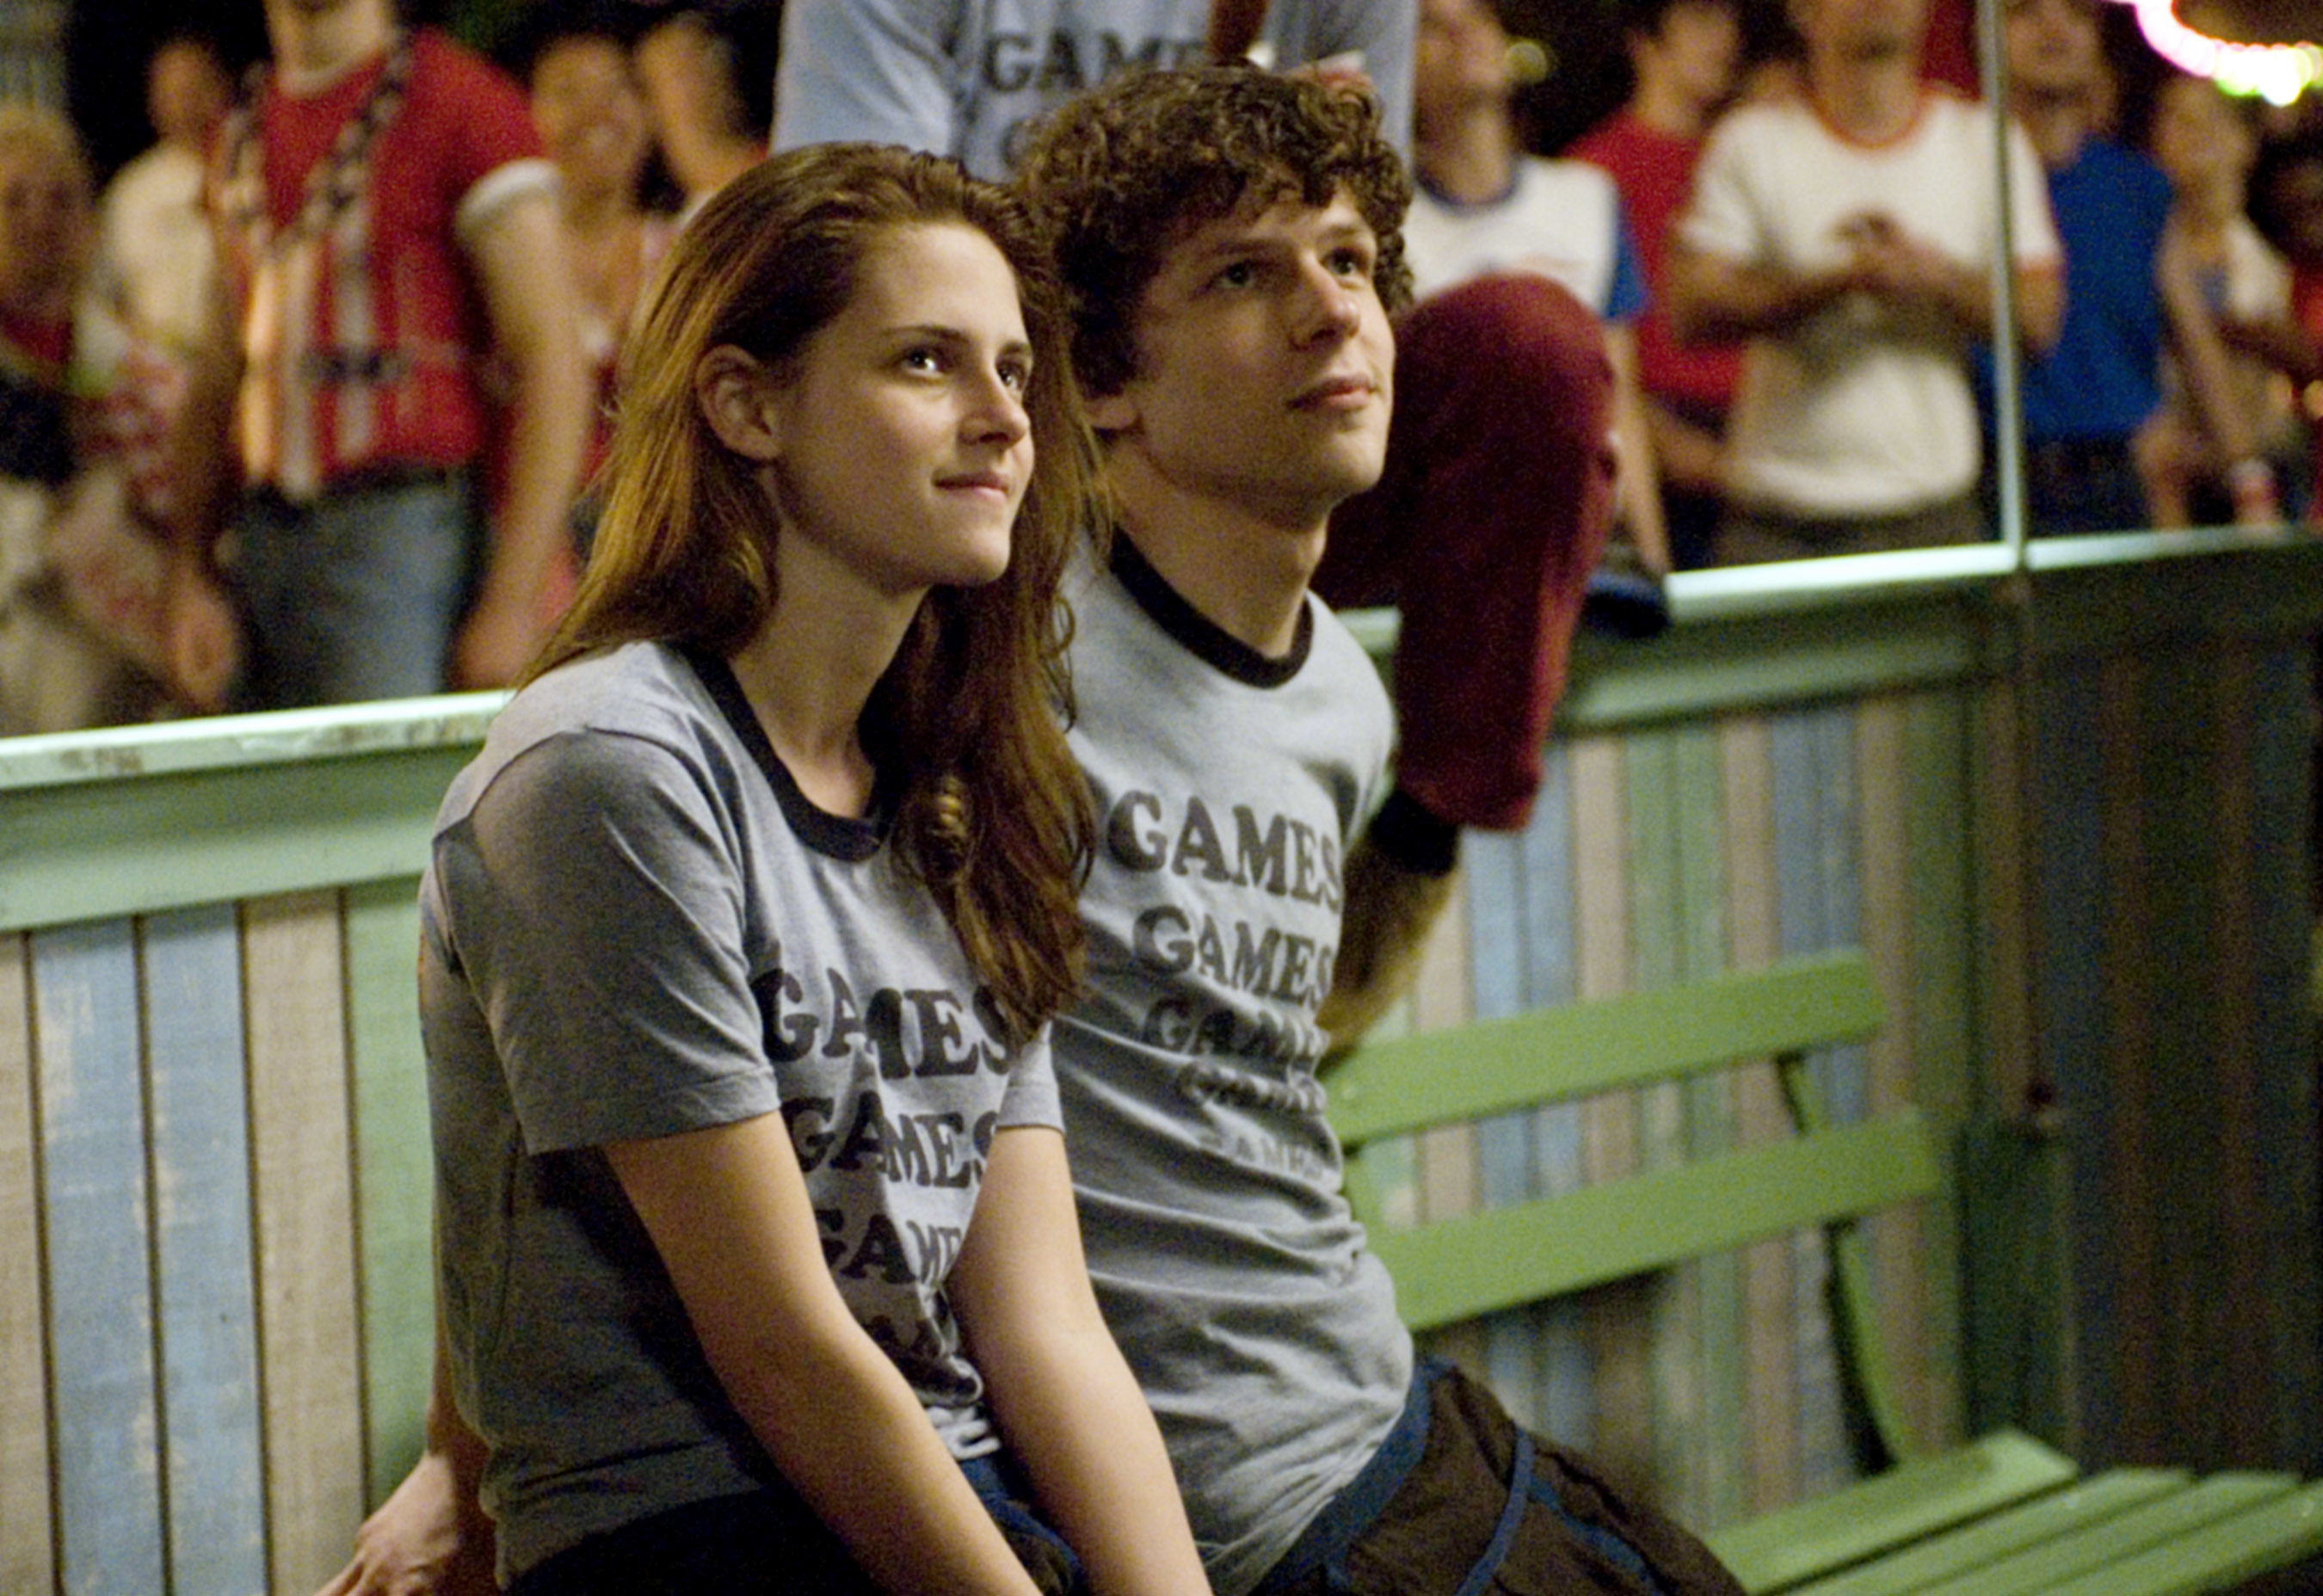 A teenage boy and girl sit at a carnival